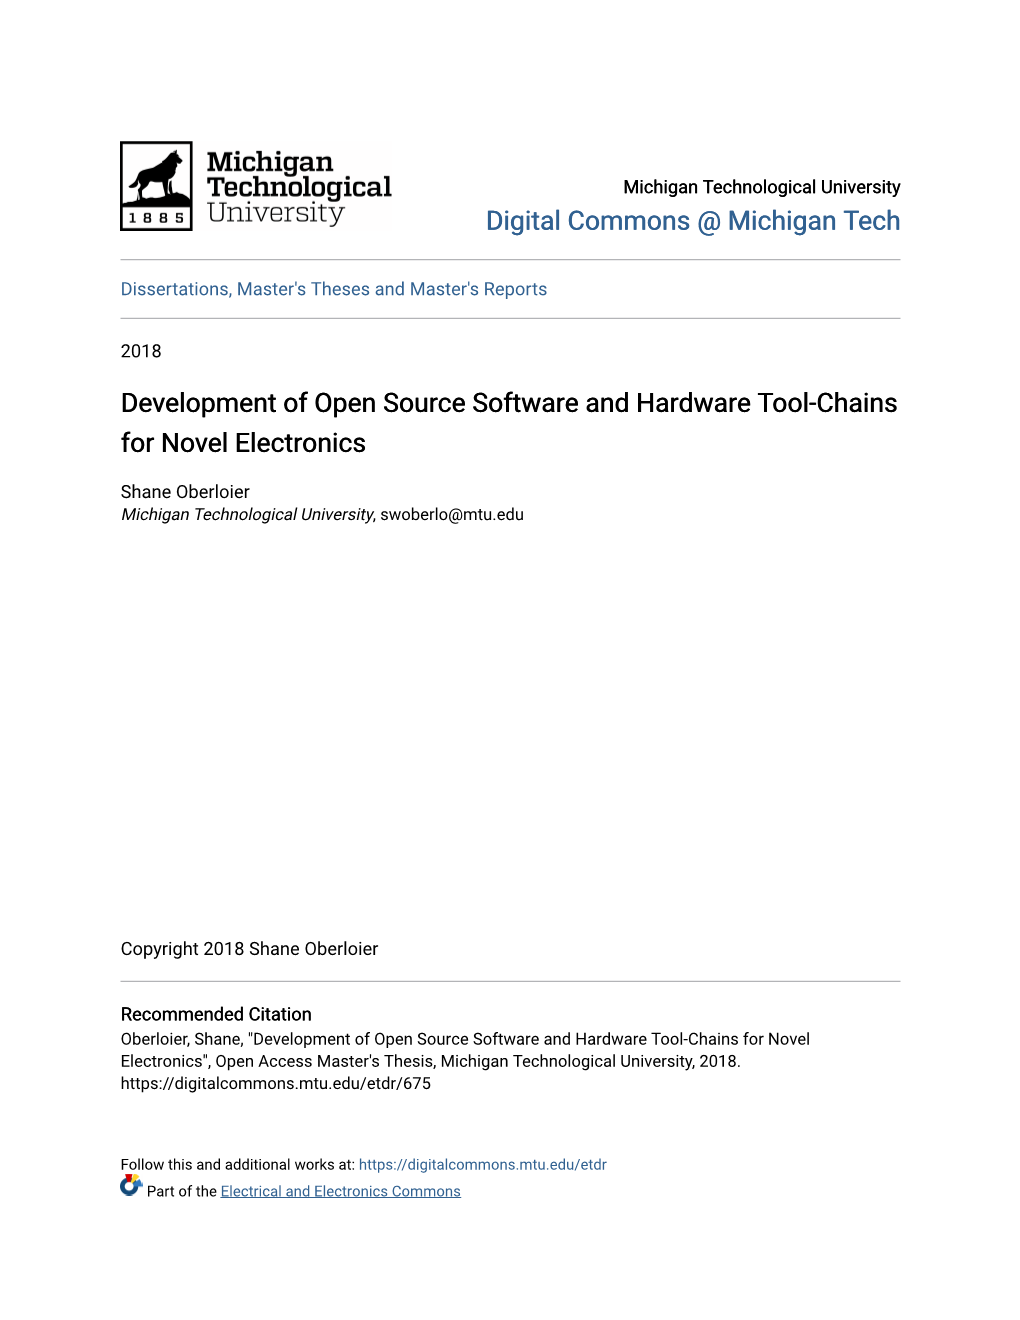 Development of Open Source Software and Hardware Tool-Chains for Novel Electronics